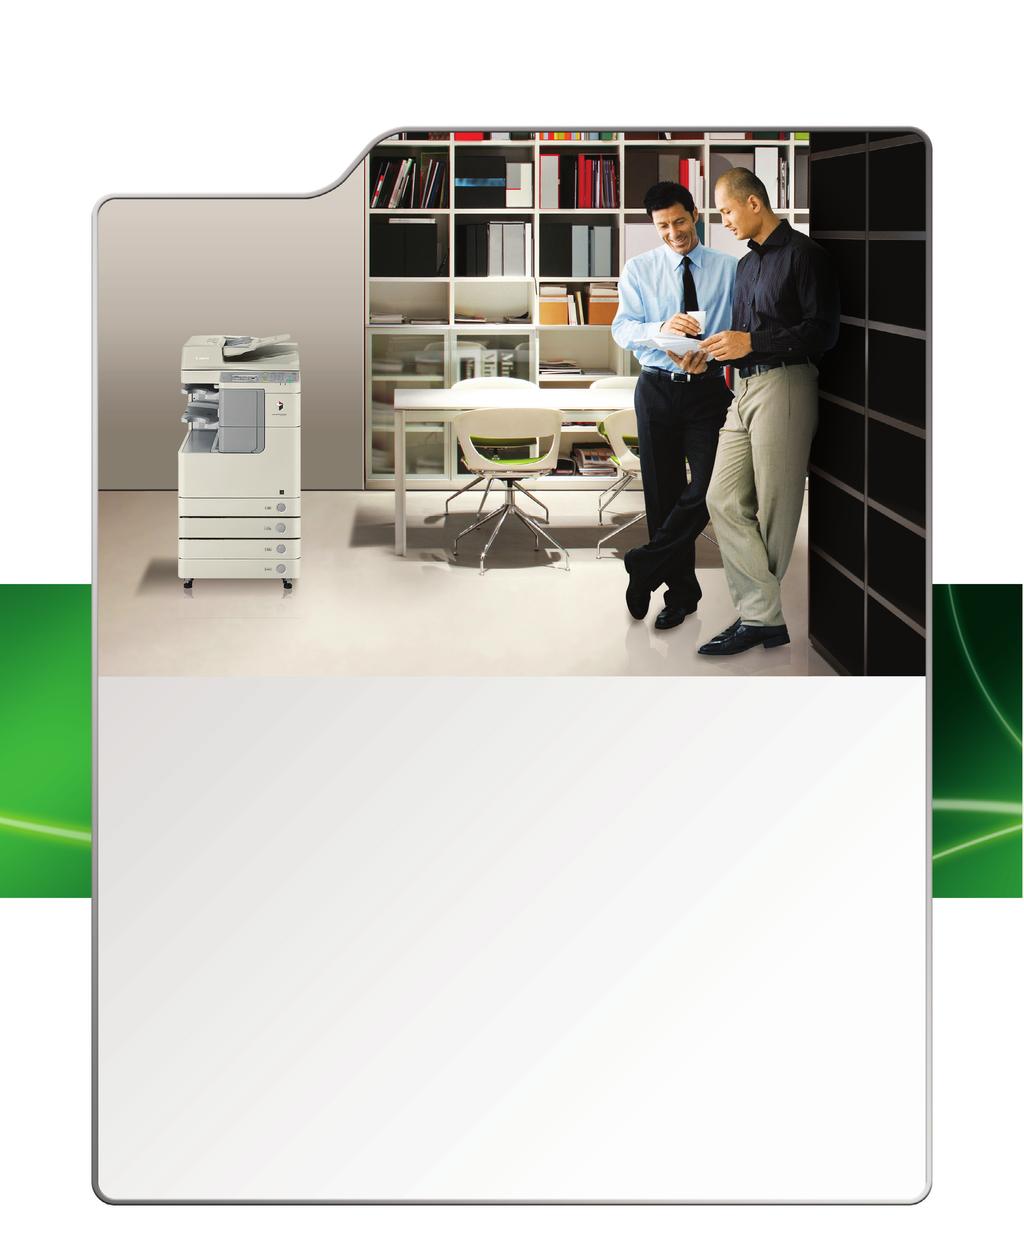 At-a-Glance Powerful performance Outstanding paper handling > Robust imagechip LITE system > Standard dual 550-sheet cassettes architecture Copy /Print /Send /Fax Up to 11"